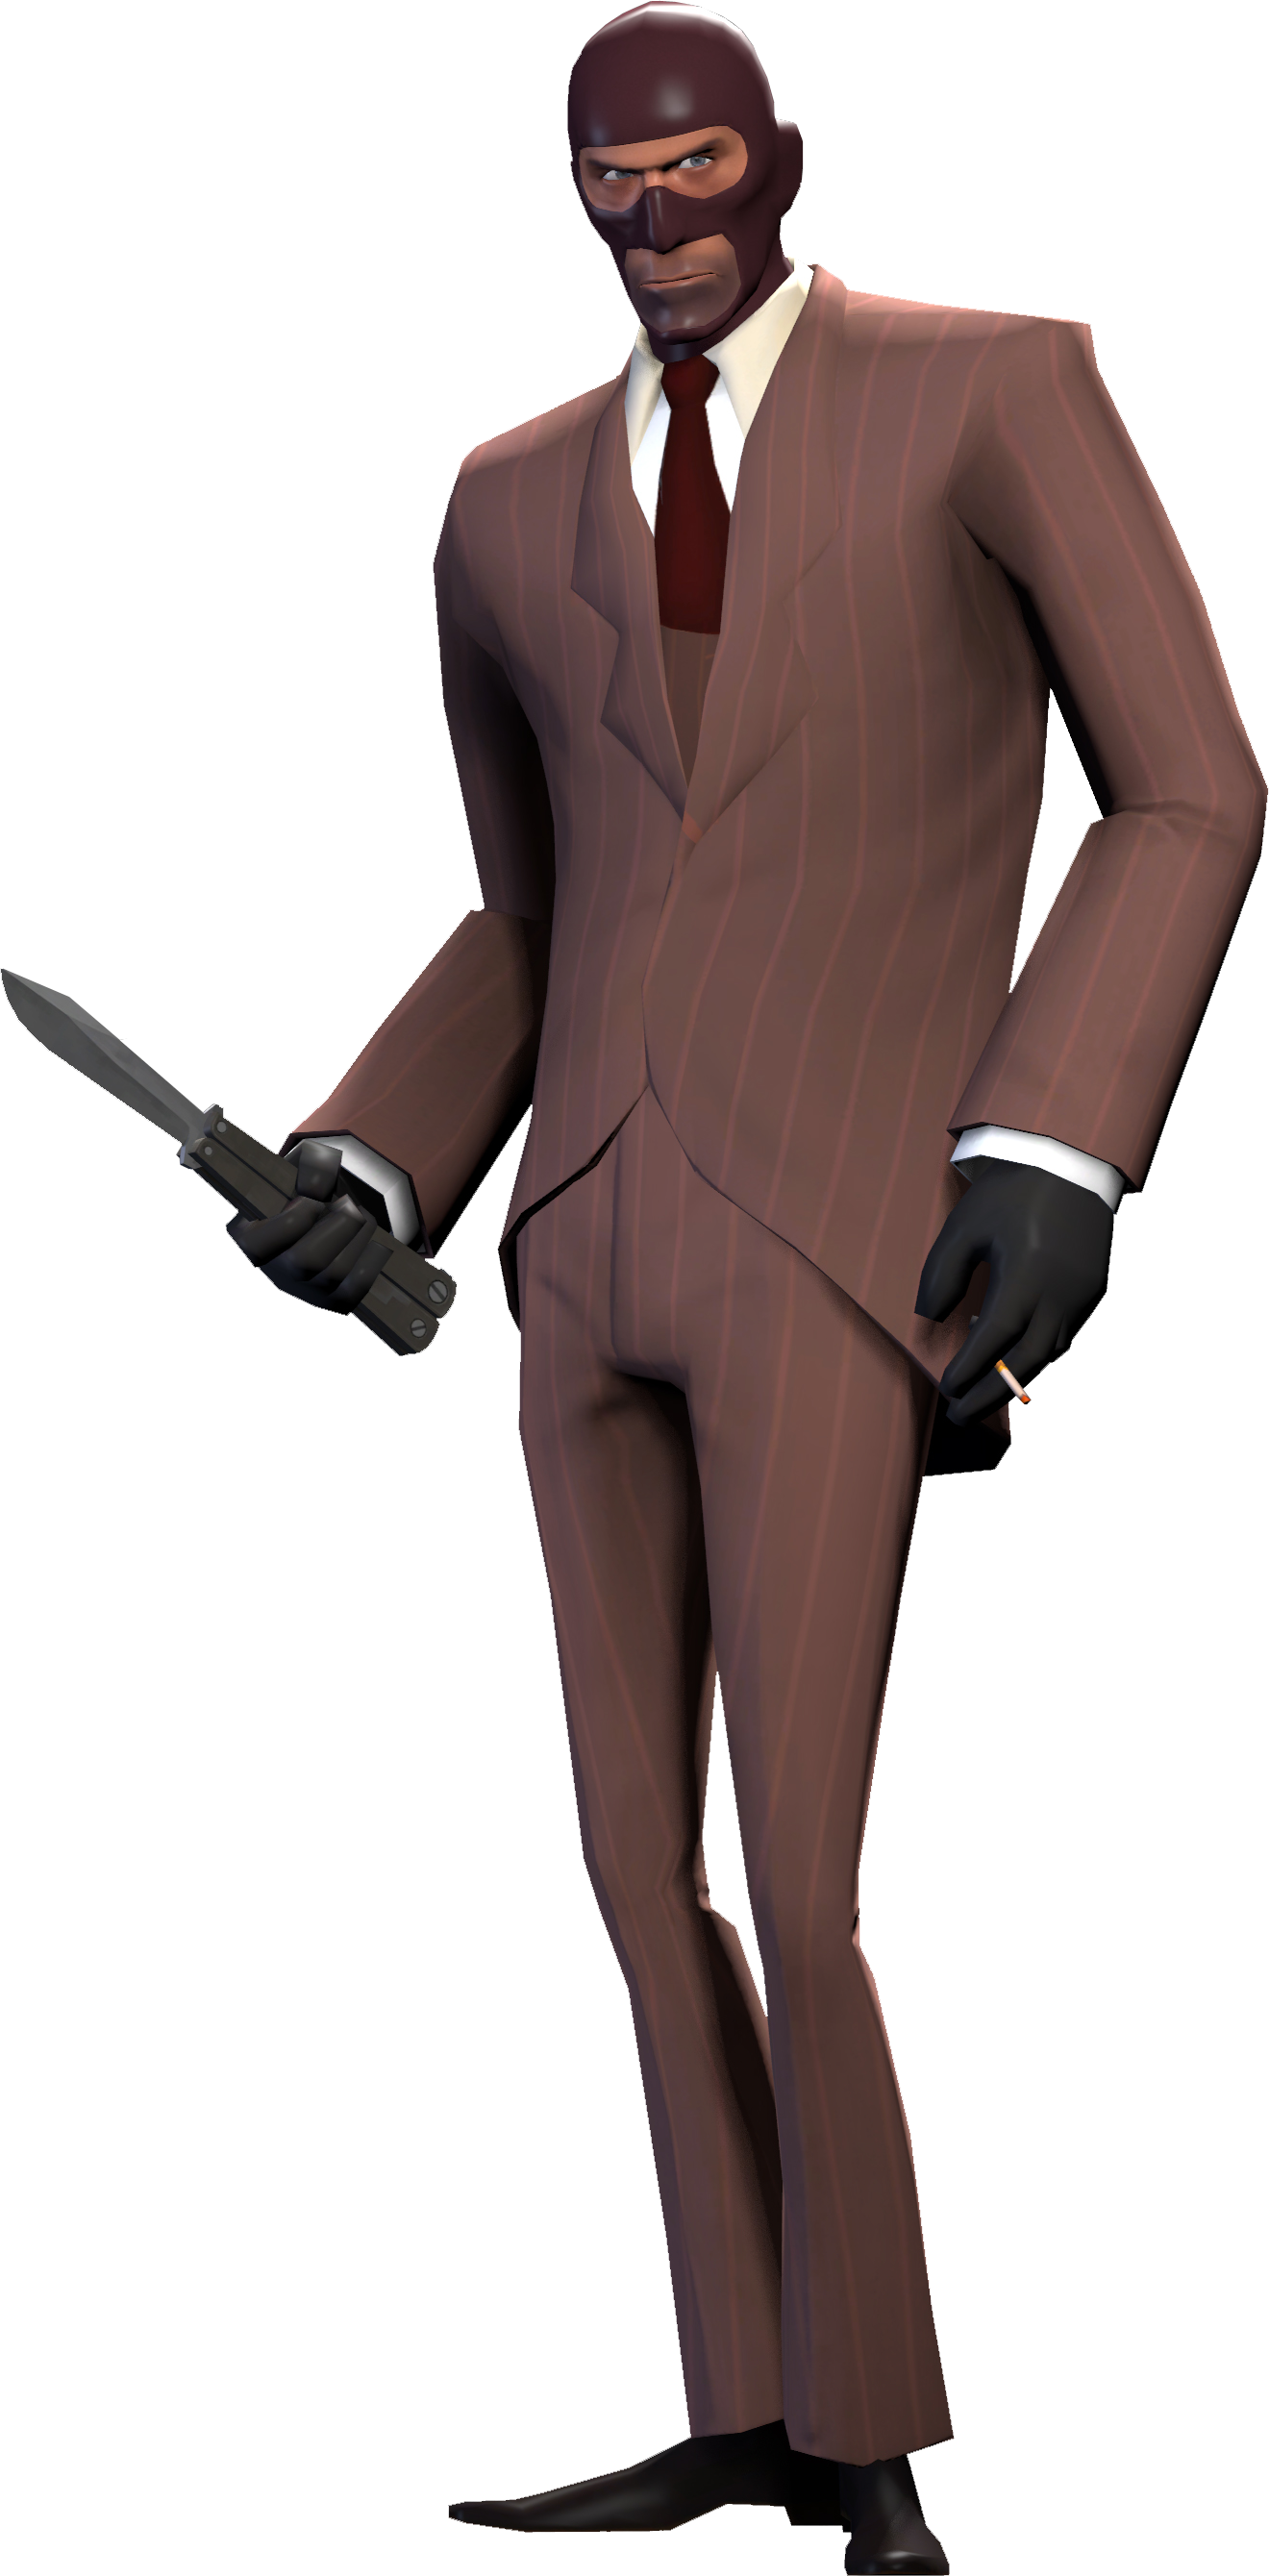 Team Fortress 2 PNG-Datei